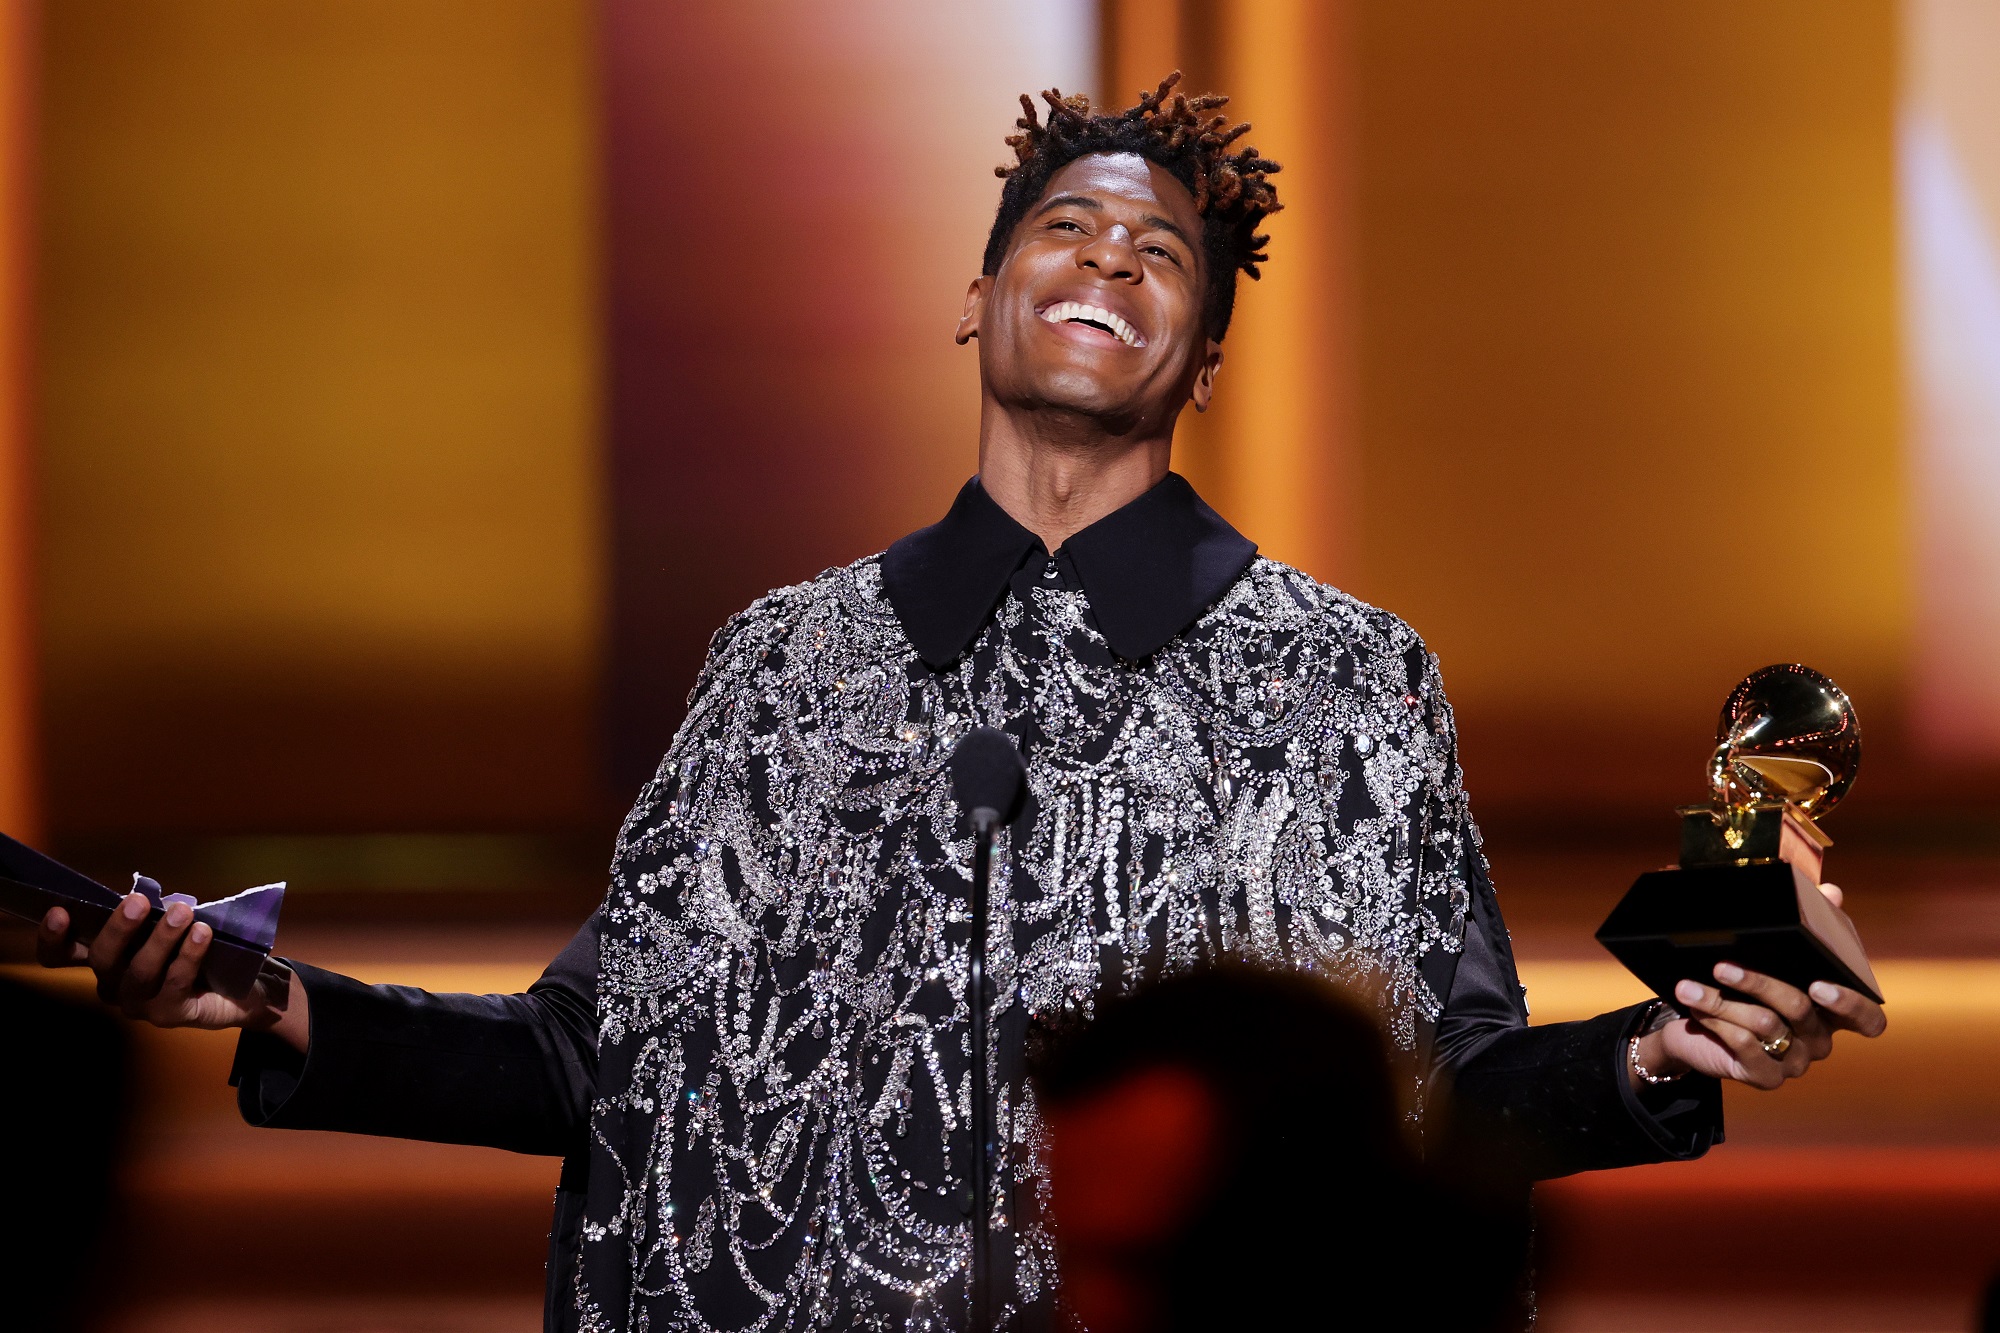 Jon Batiste on stage accepting the Album of the Year award at the 2022 Grammy Awards